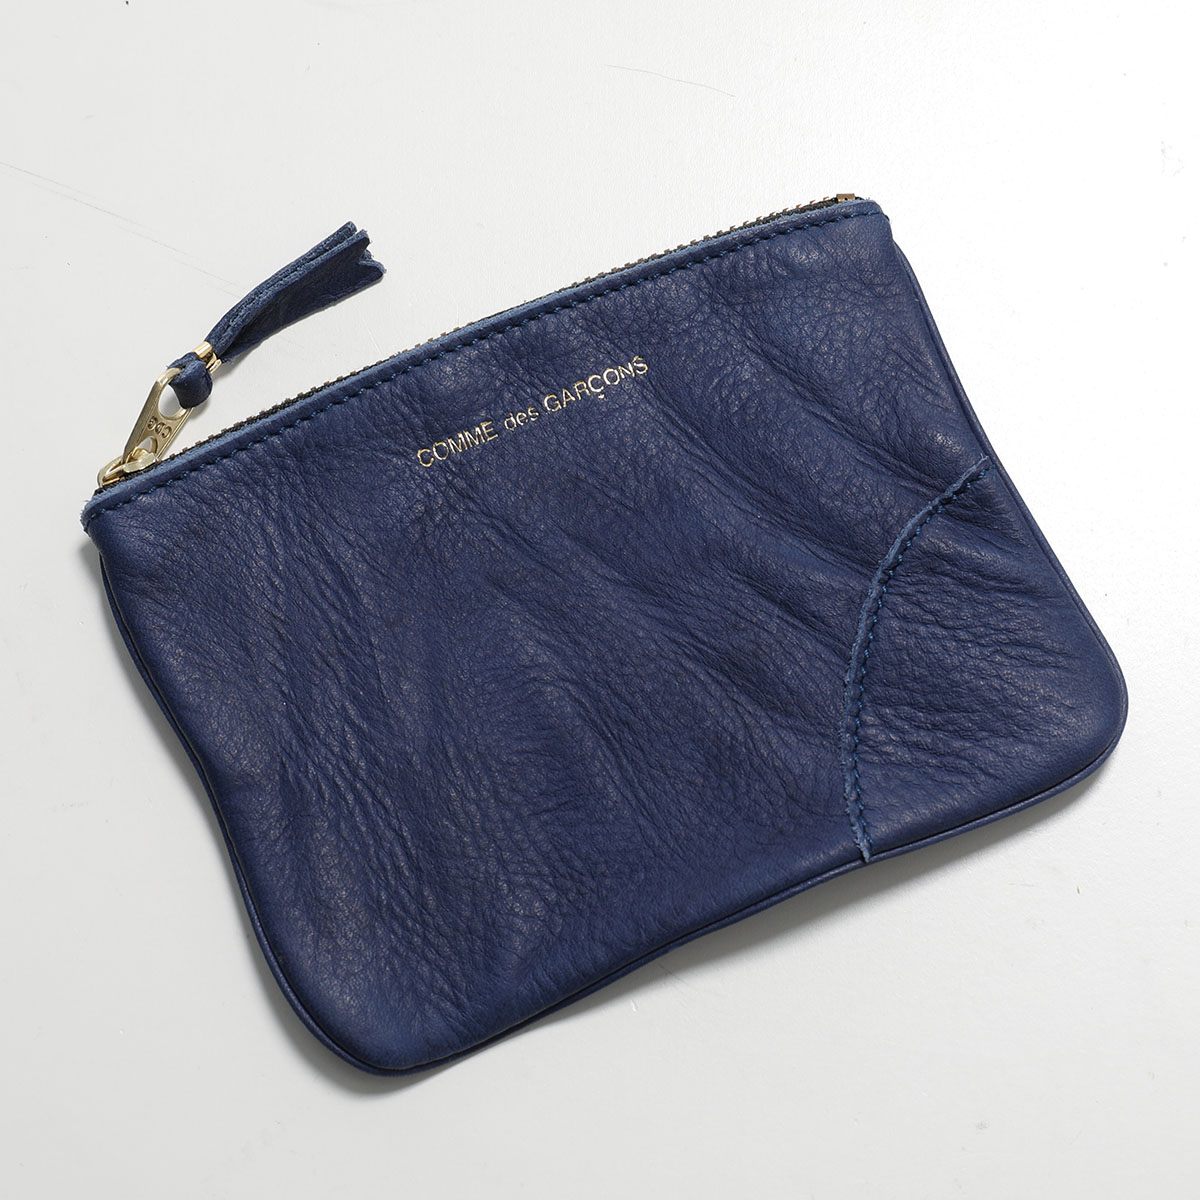 COMME des GARCONS コムデギャルソン コインケース WASHED WALLET SA8100WW メンズ カードケース レザー カラー4色｜s-musee｜05